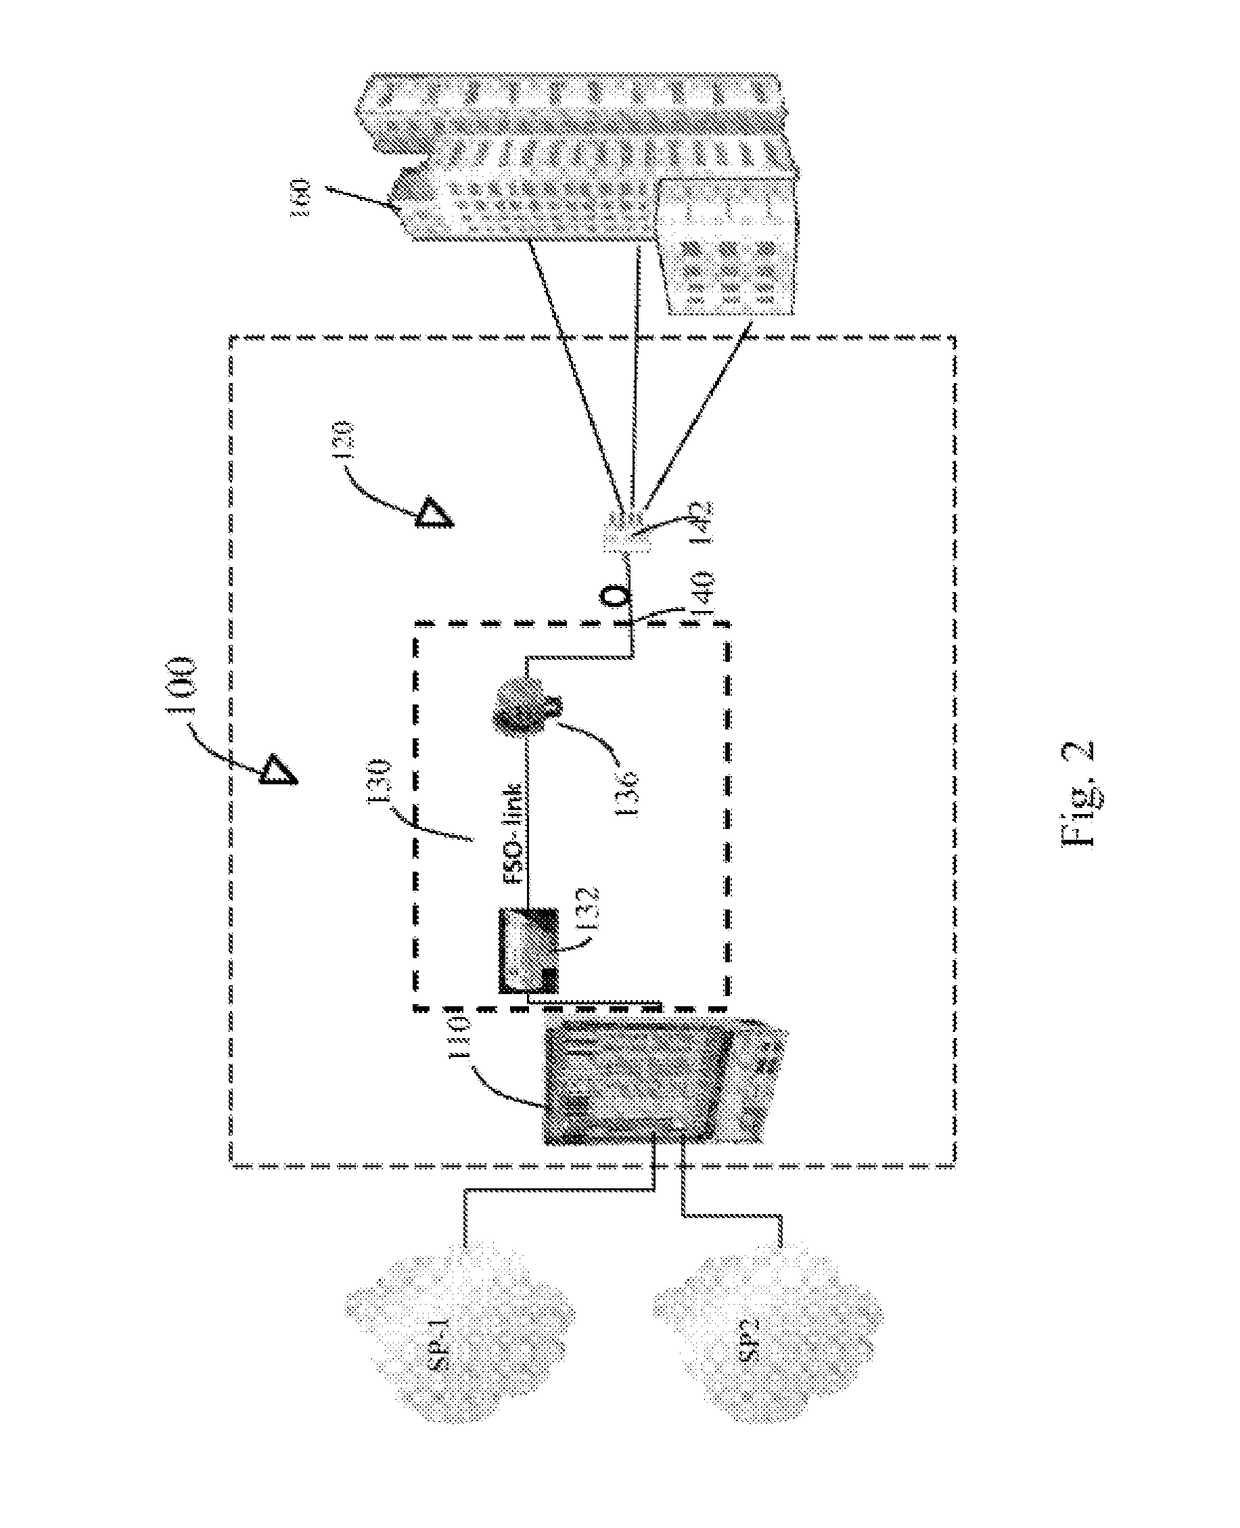 System and method for providing resilience in communication networks